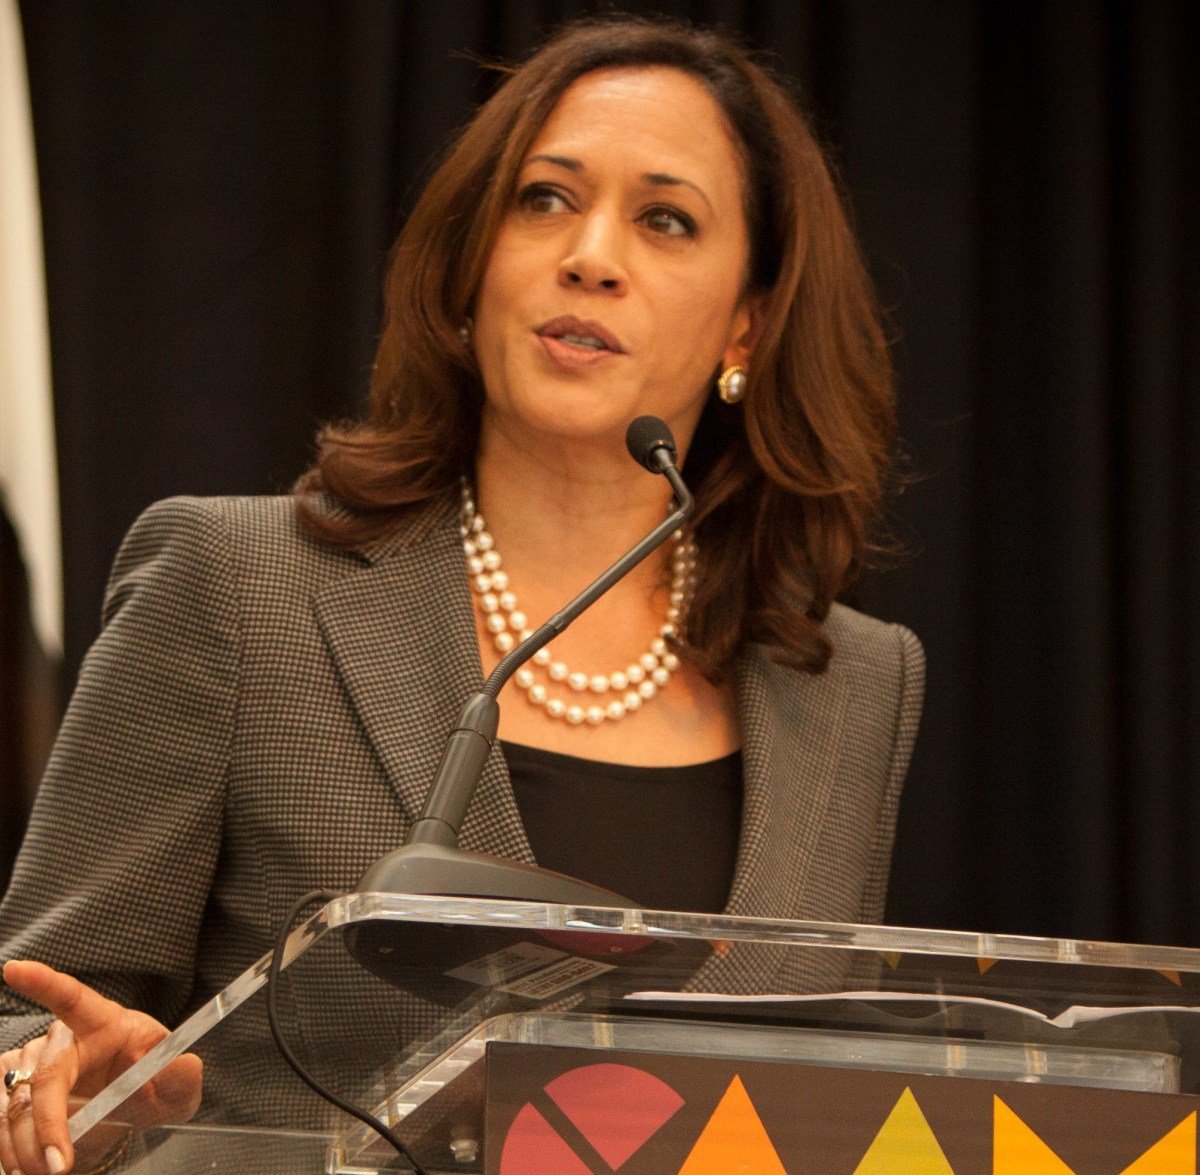 Harris: Young Black Men Jailed For Selling Pot Should Be 'First in Line for Legal Weed Jobs'